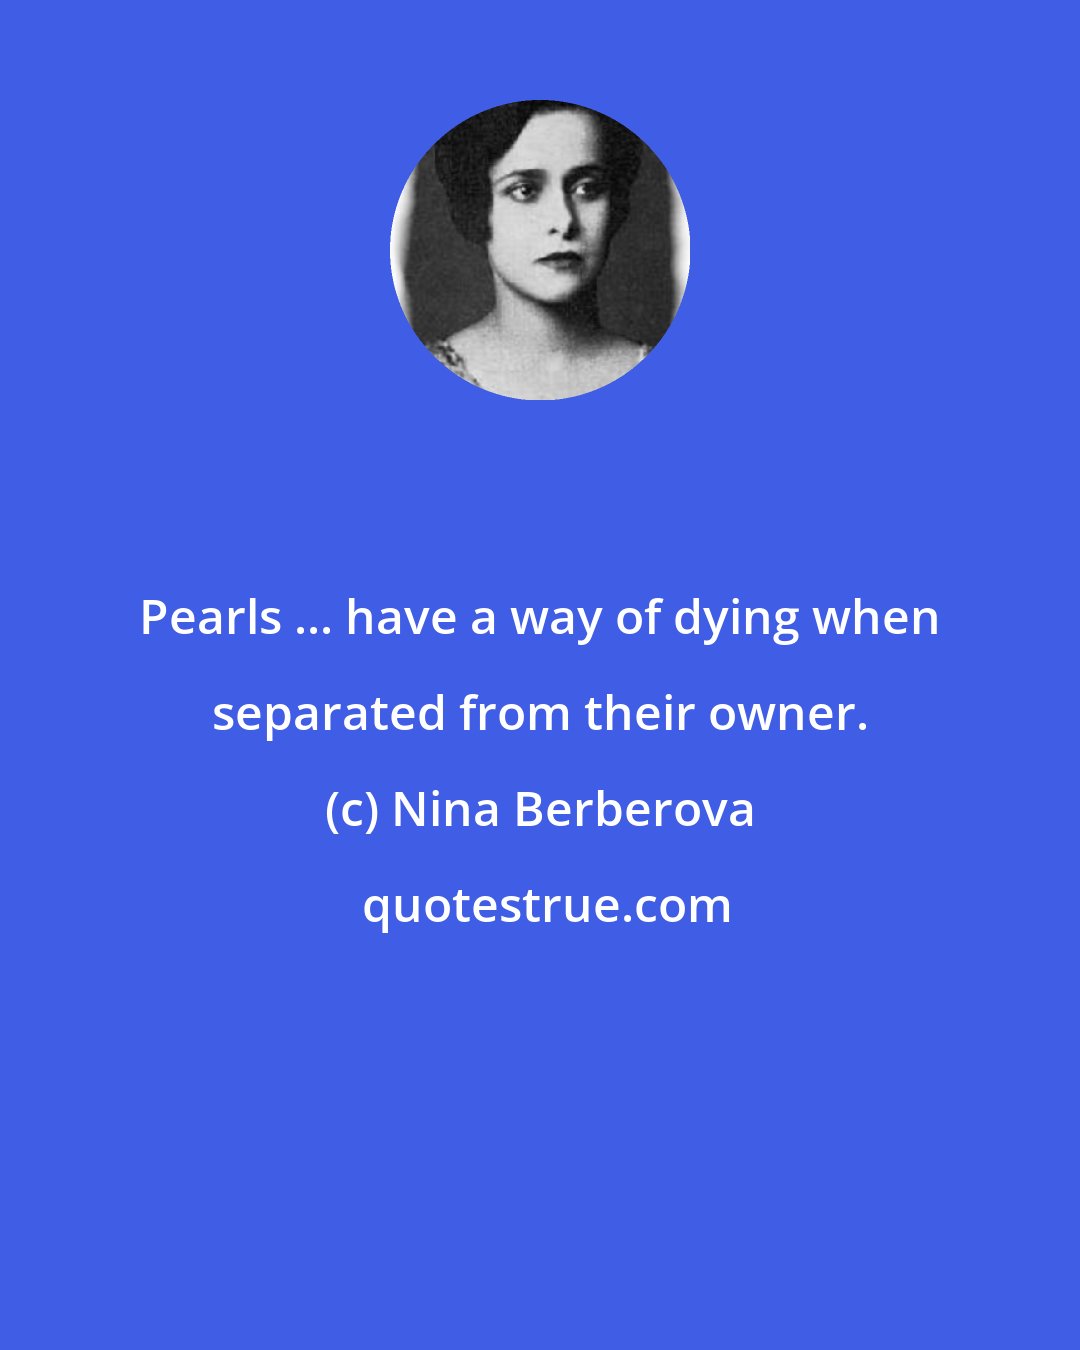 Nina Berberova: Pearls ... have a way of dying when separated from their owner.